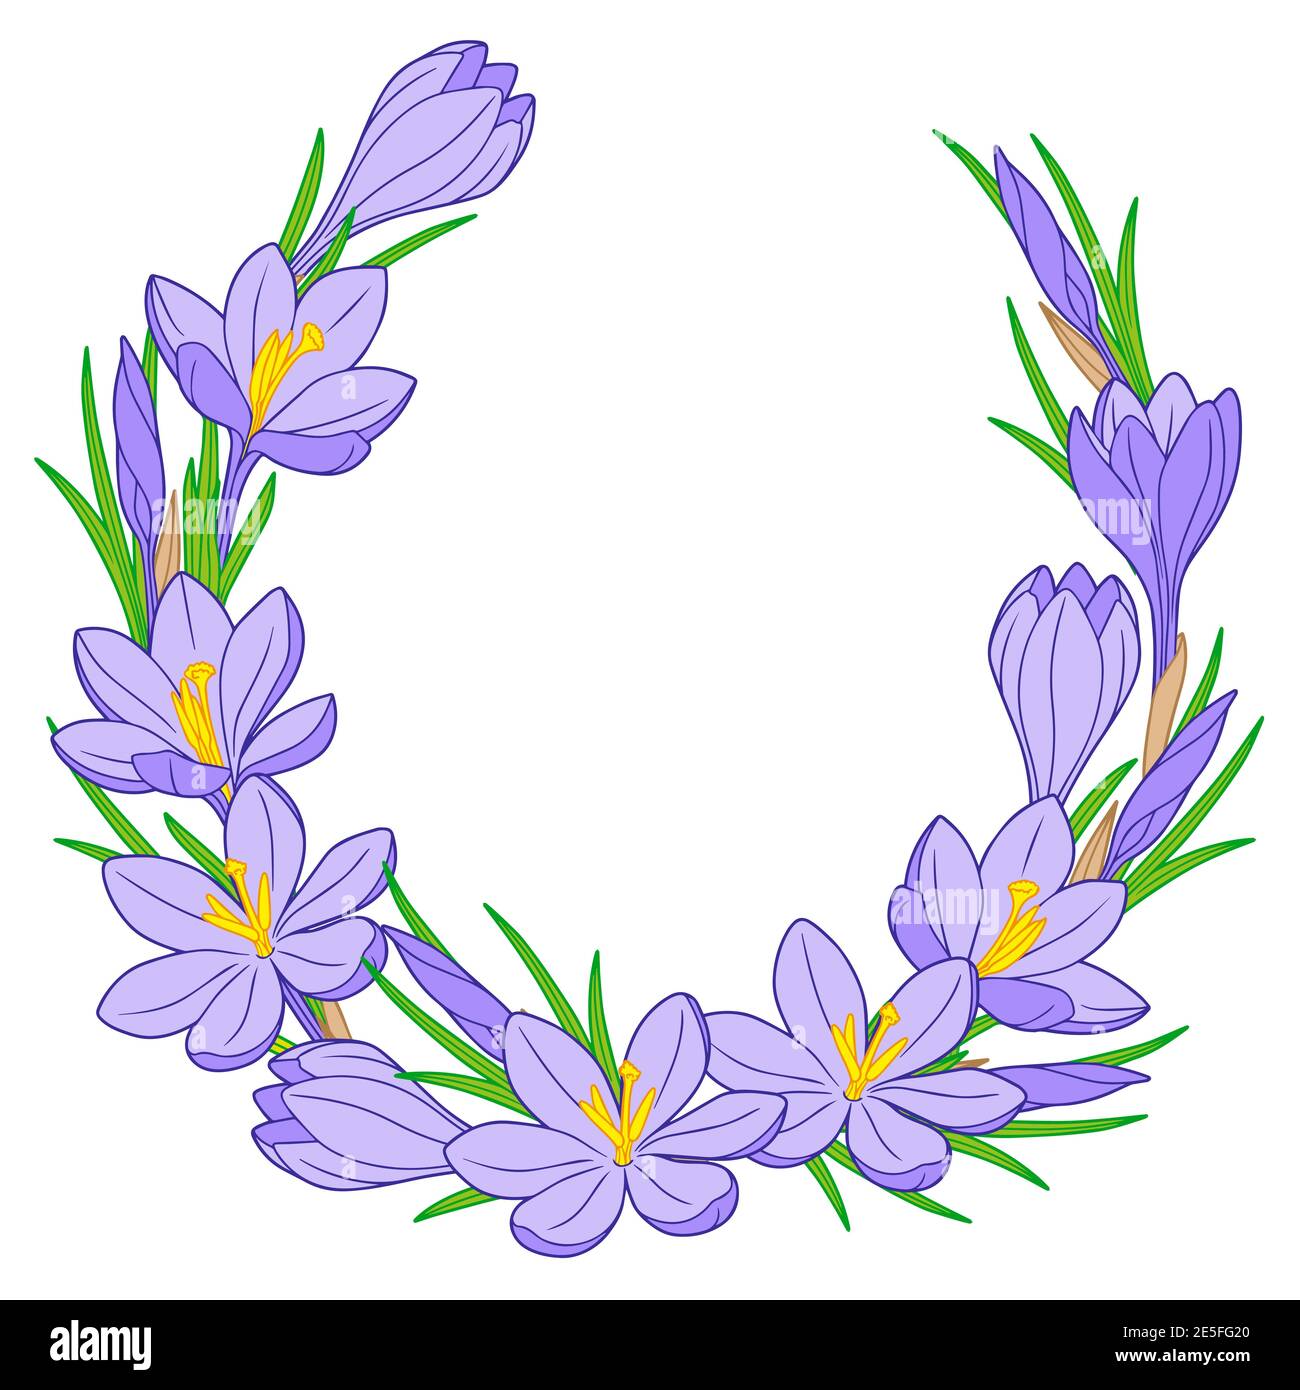 Vector frame with blue crocus flowers on a white background Stock Vector